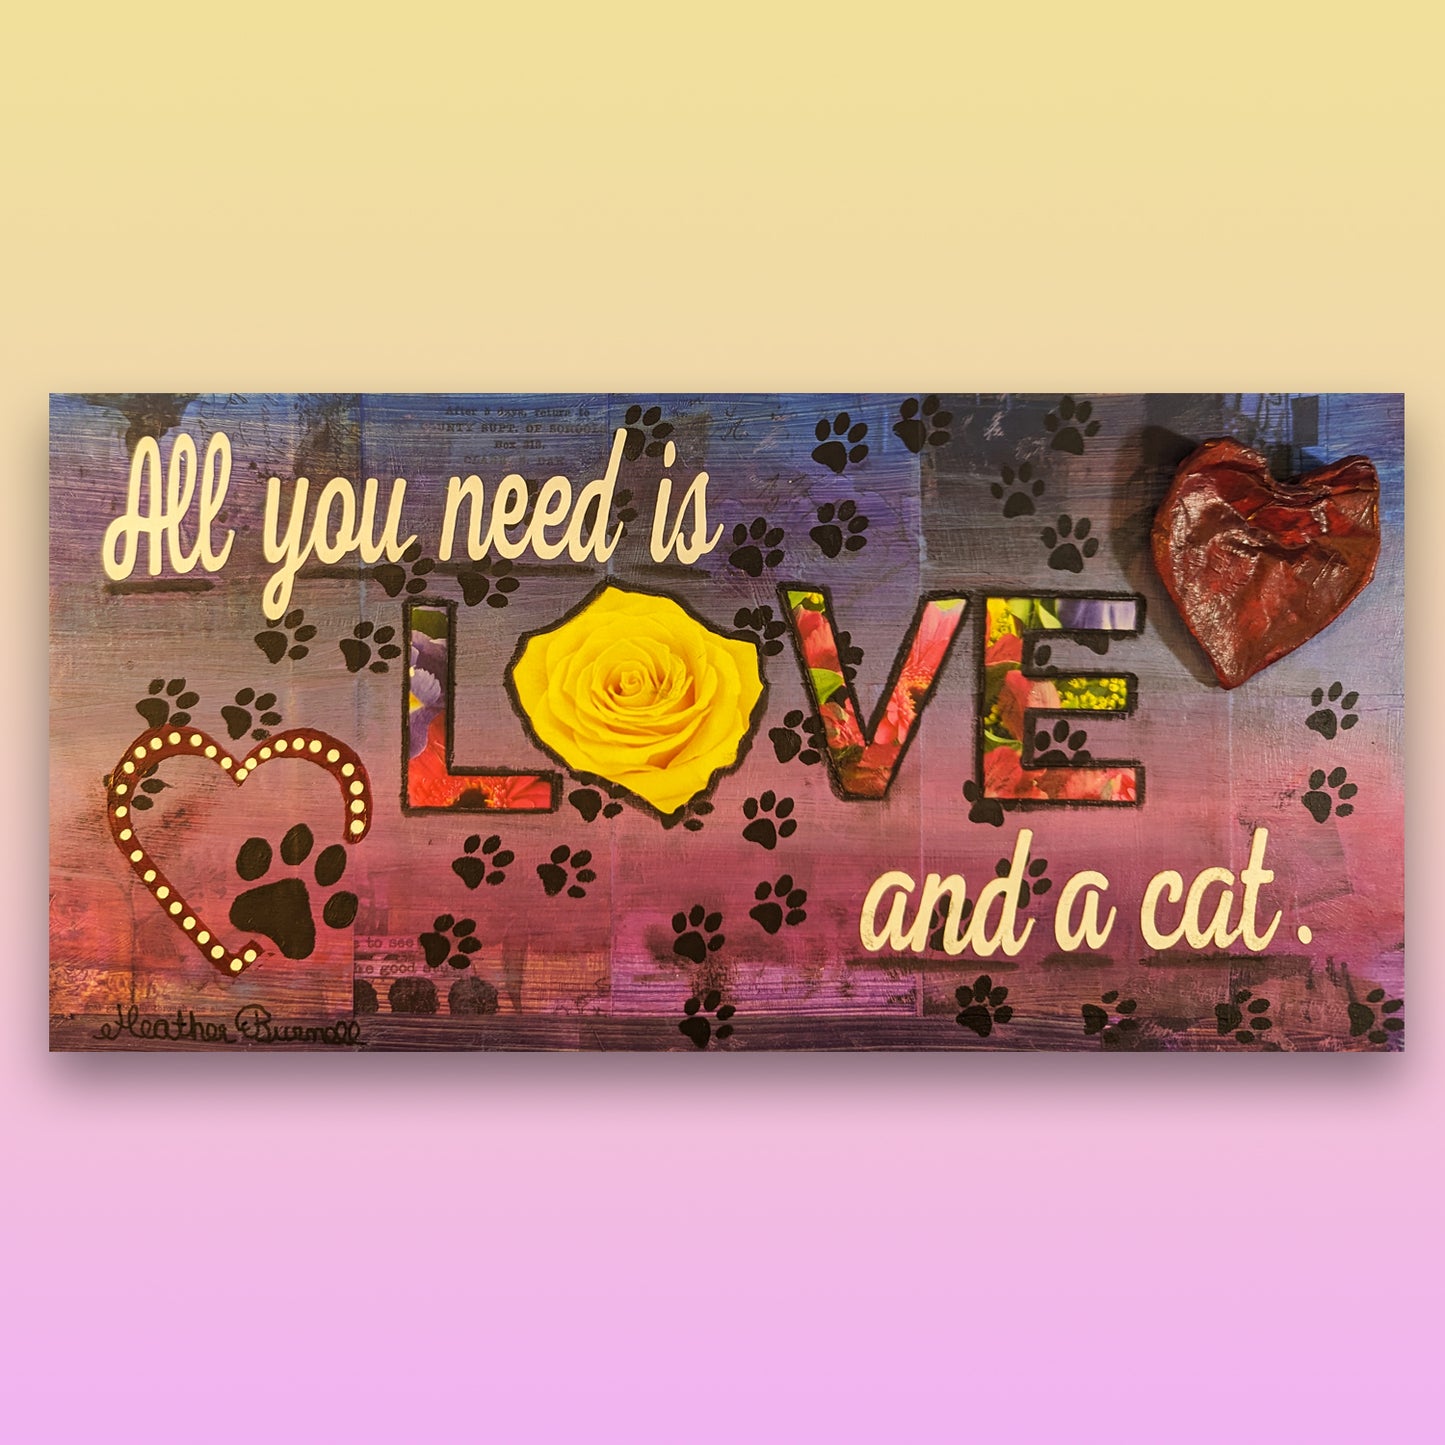 All You Need is Love and a Cat - Version #2